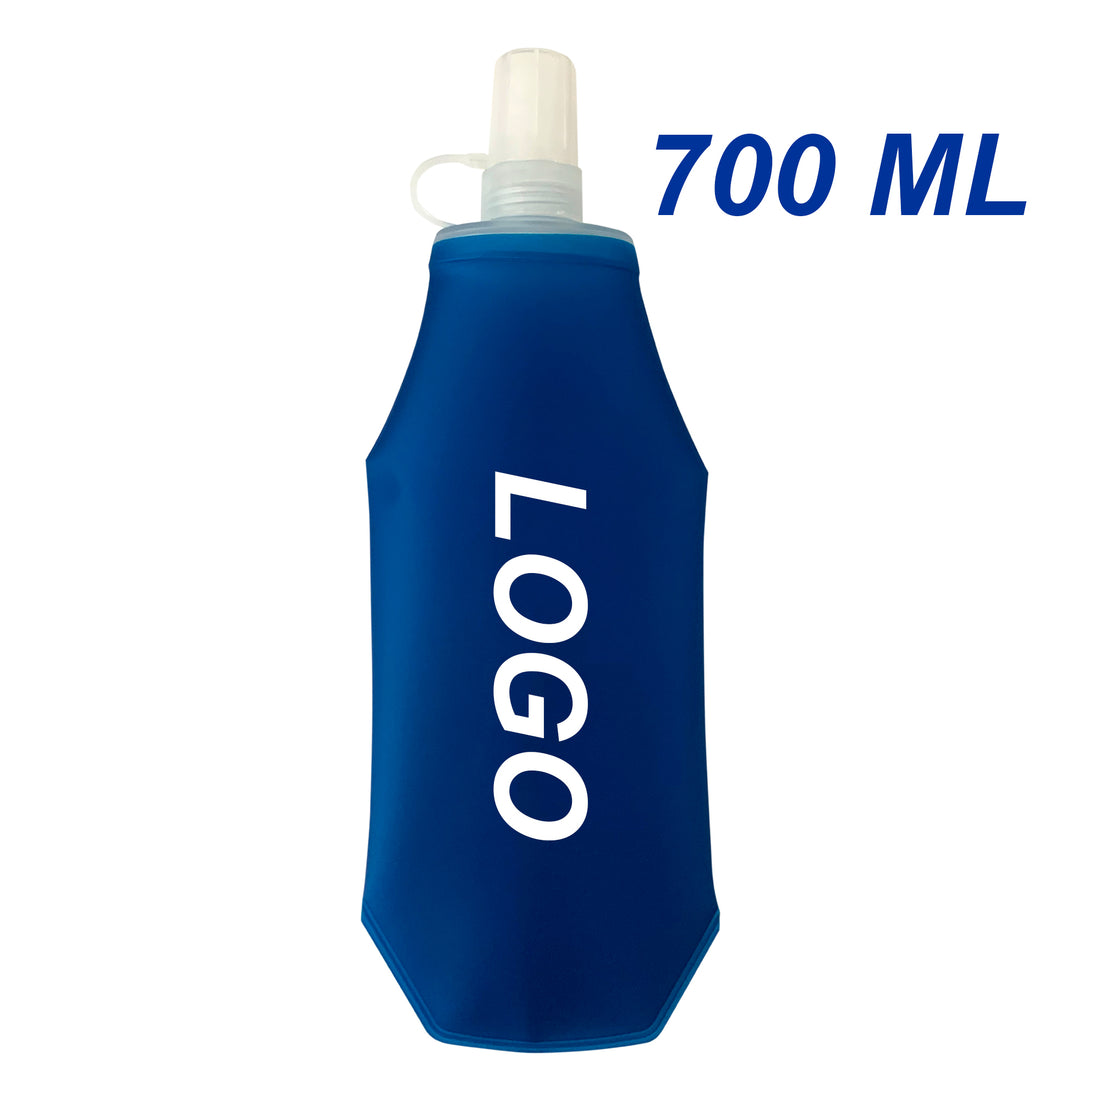 Soft Water Flask 700 ML 500 ML BPA Free Food Safety Running Water Bottle Collapsible Flask For Racing, Hiking, Camping, Cycling